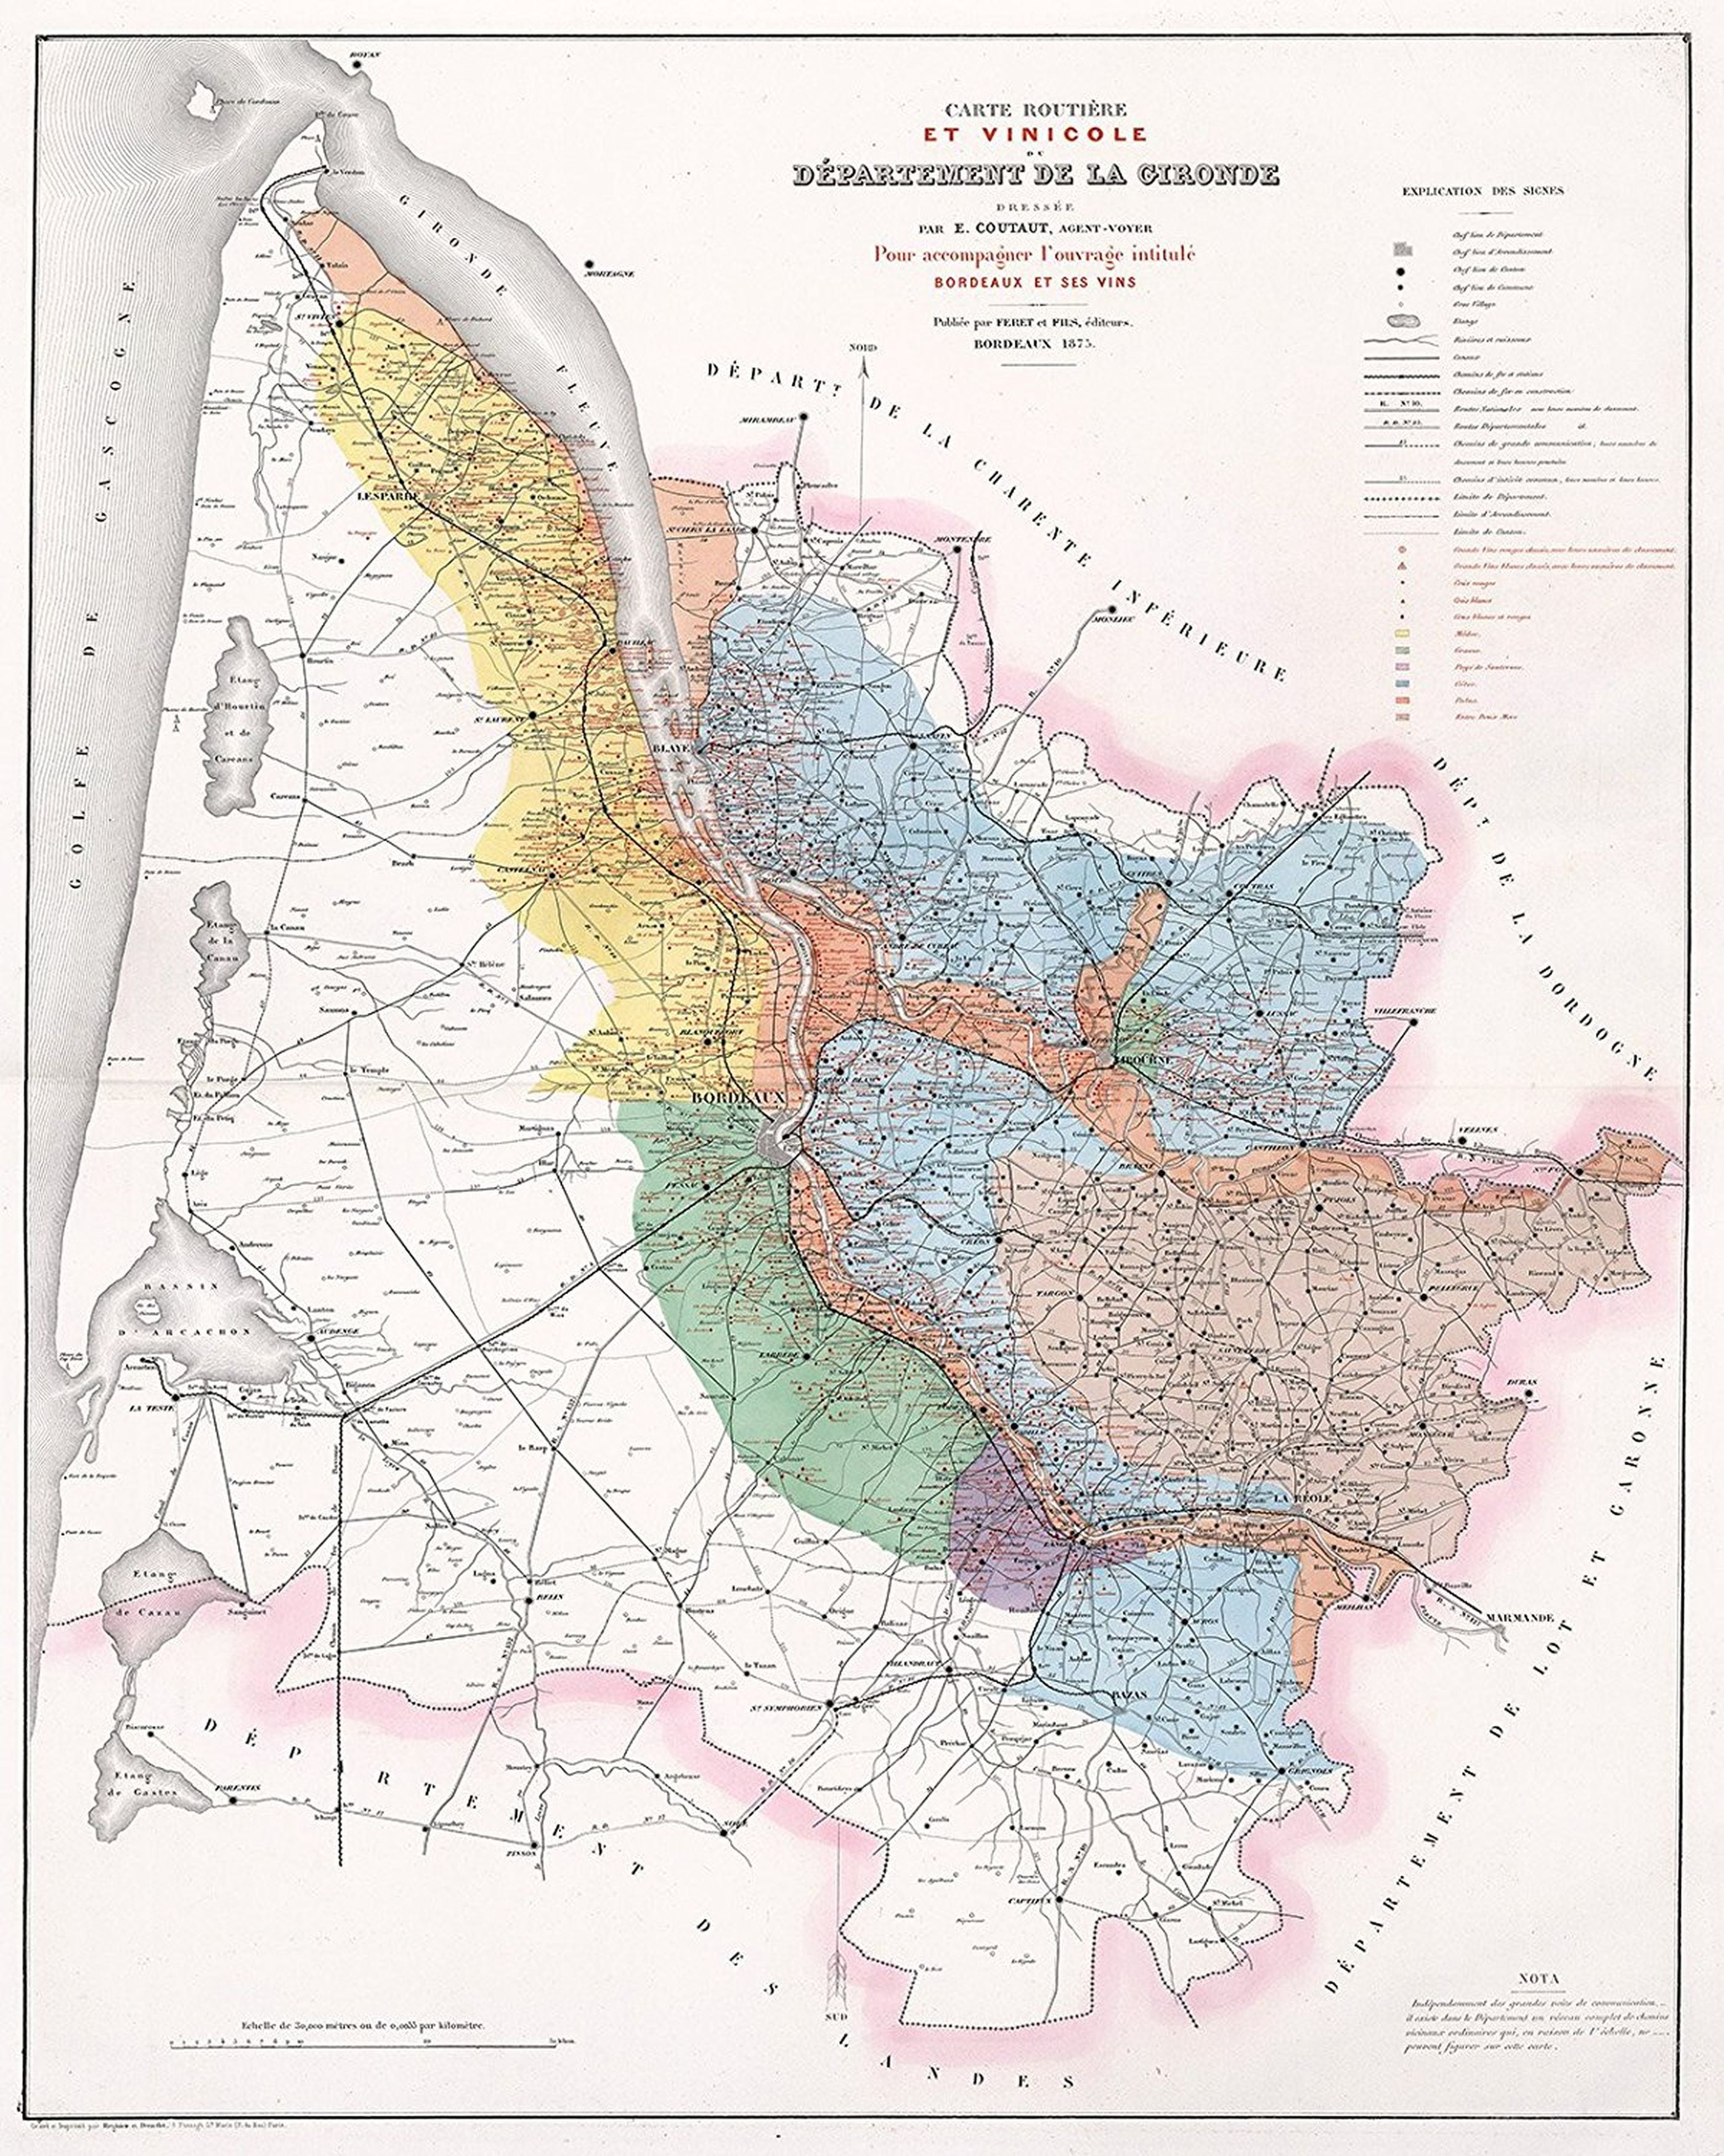 This is a wonderful 1875 map of the Department of Gironde, France, published by Feret and Fils. It depicts the Gironde on a grand scale with color coding according to wine region and type. The map also notes several important towns, villages, rivers, can